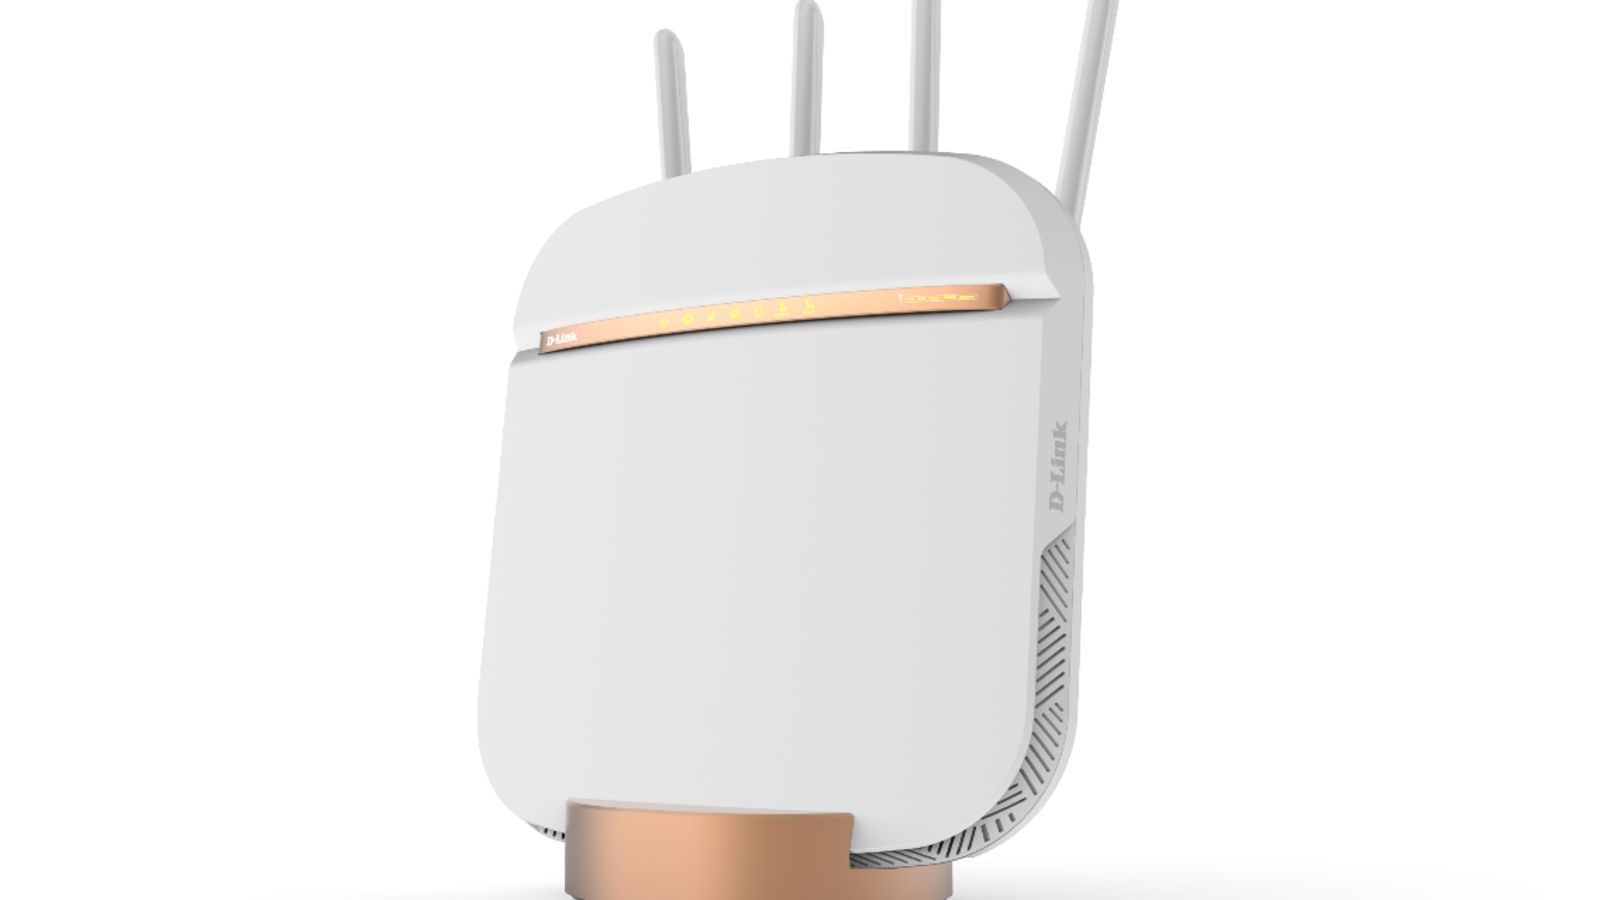 D-link 5G wifi router